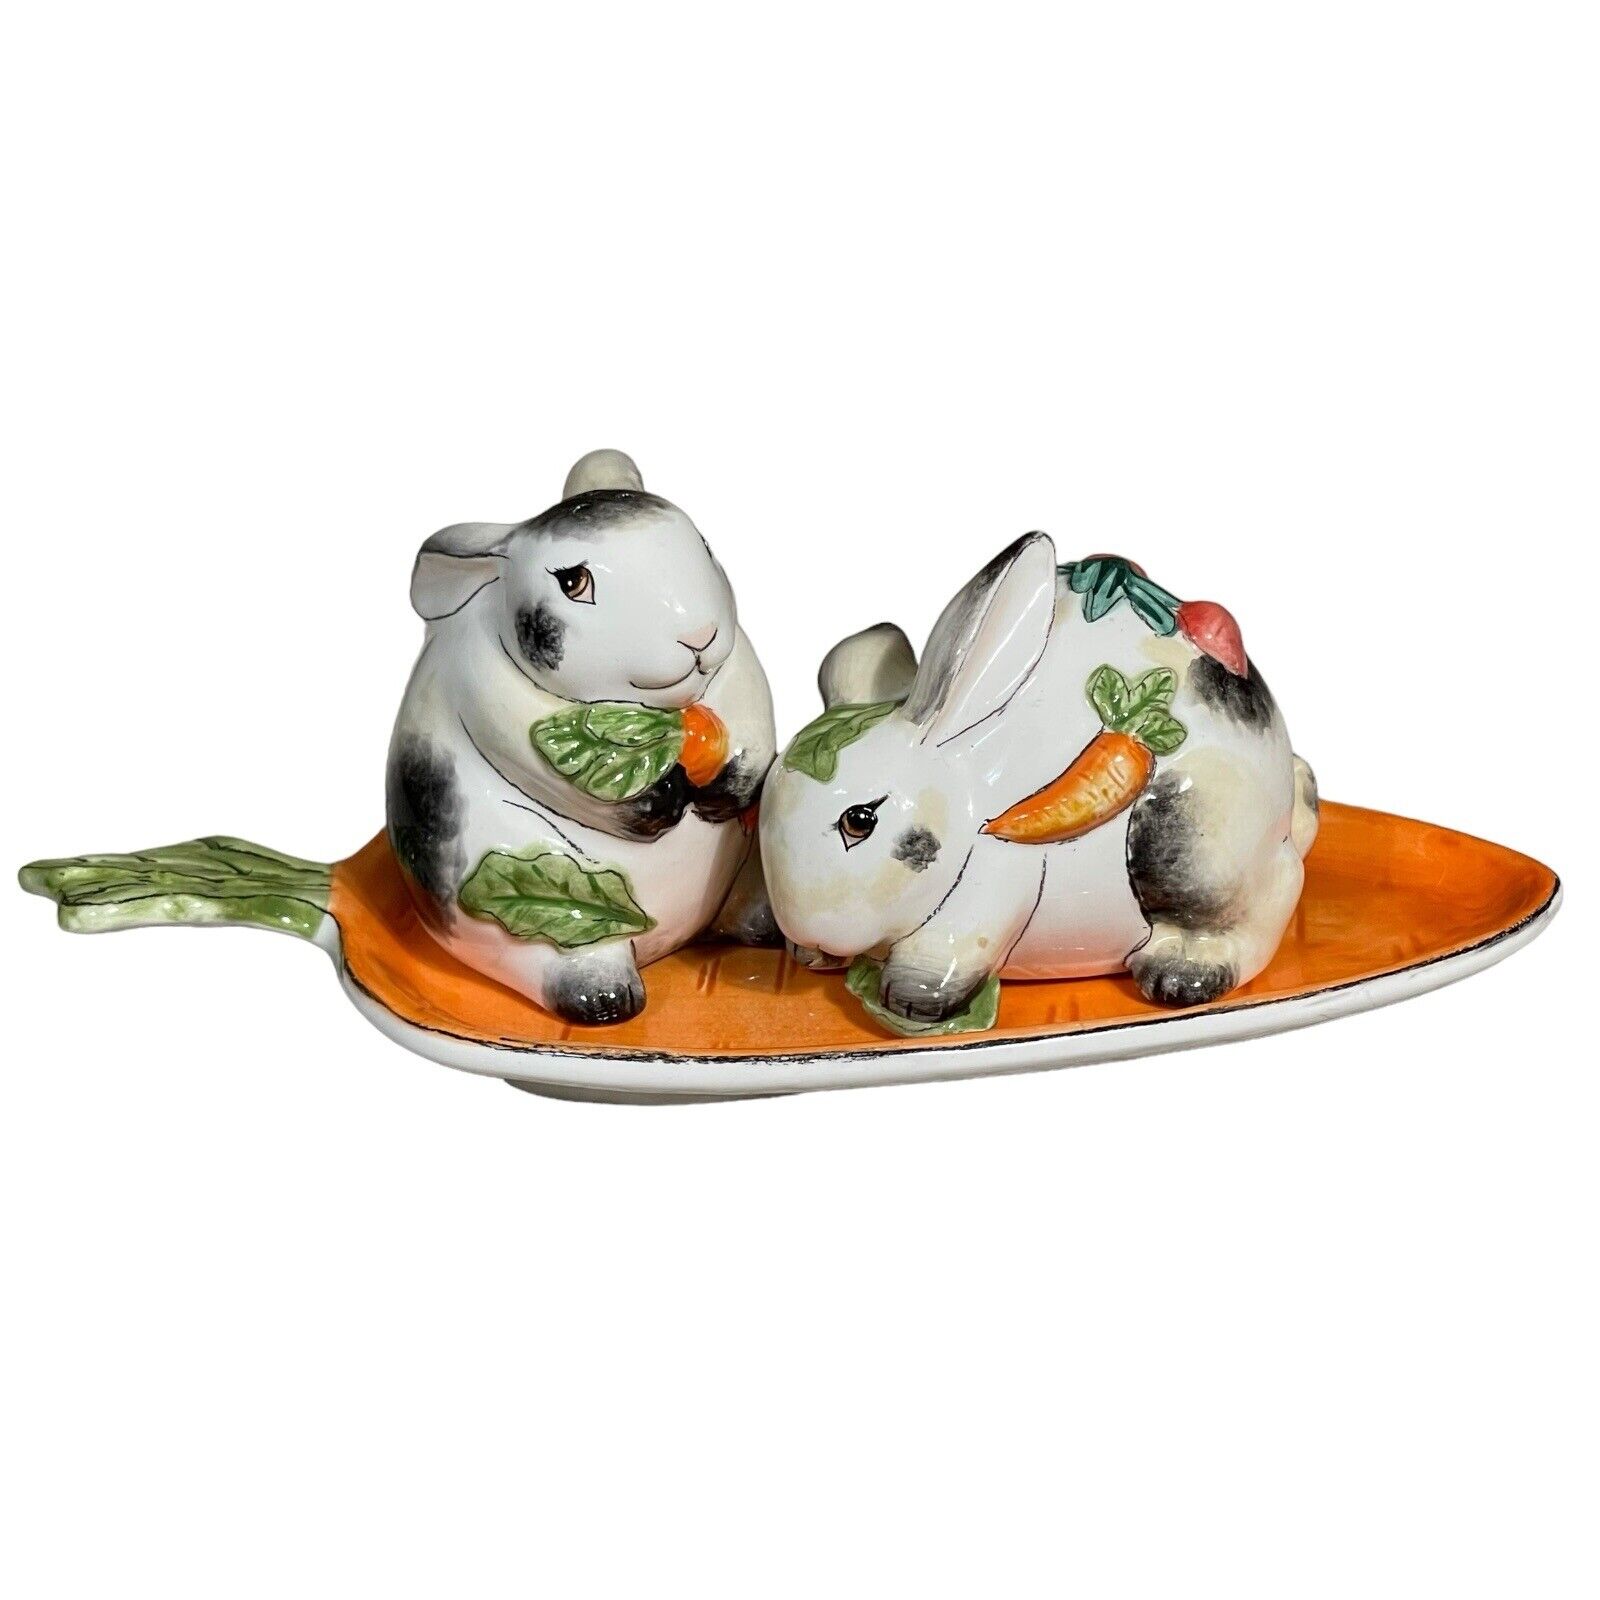 Fitz and Floyd Spotted Rabbit Set Salt & Pepper Shakers With Carrot Tray Easter